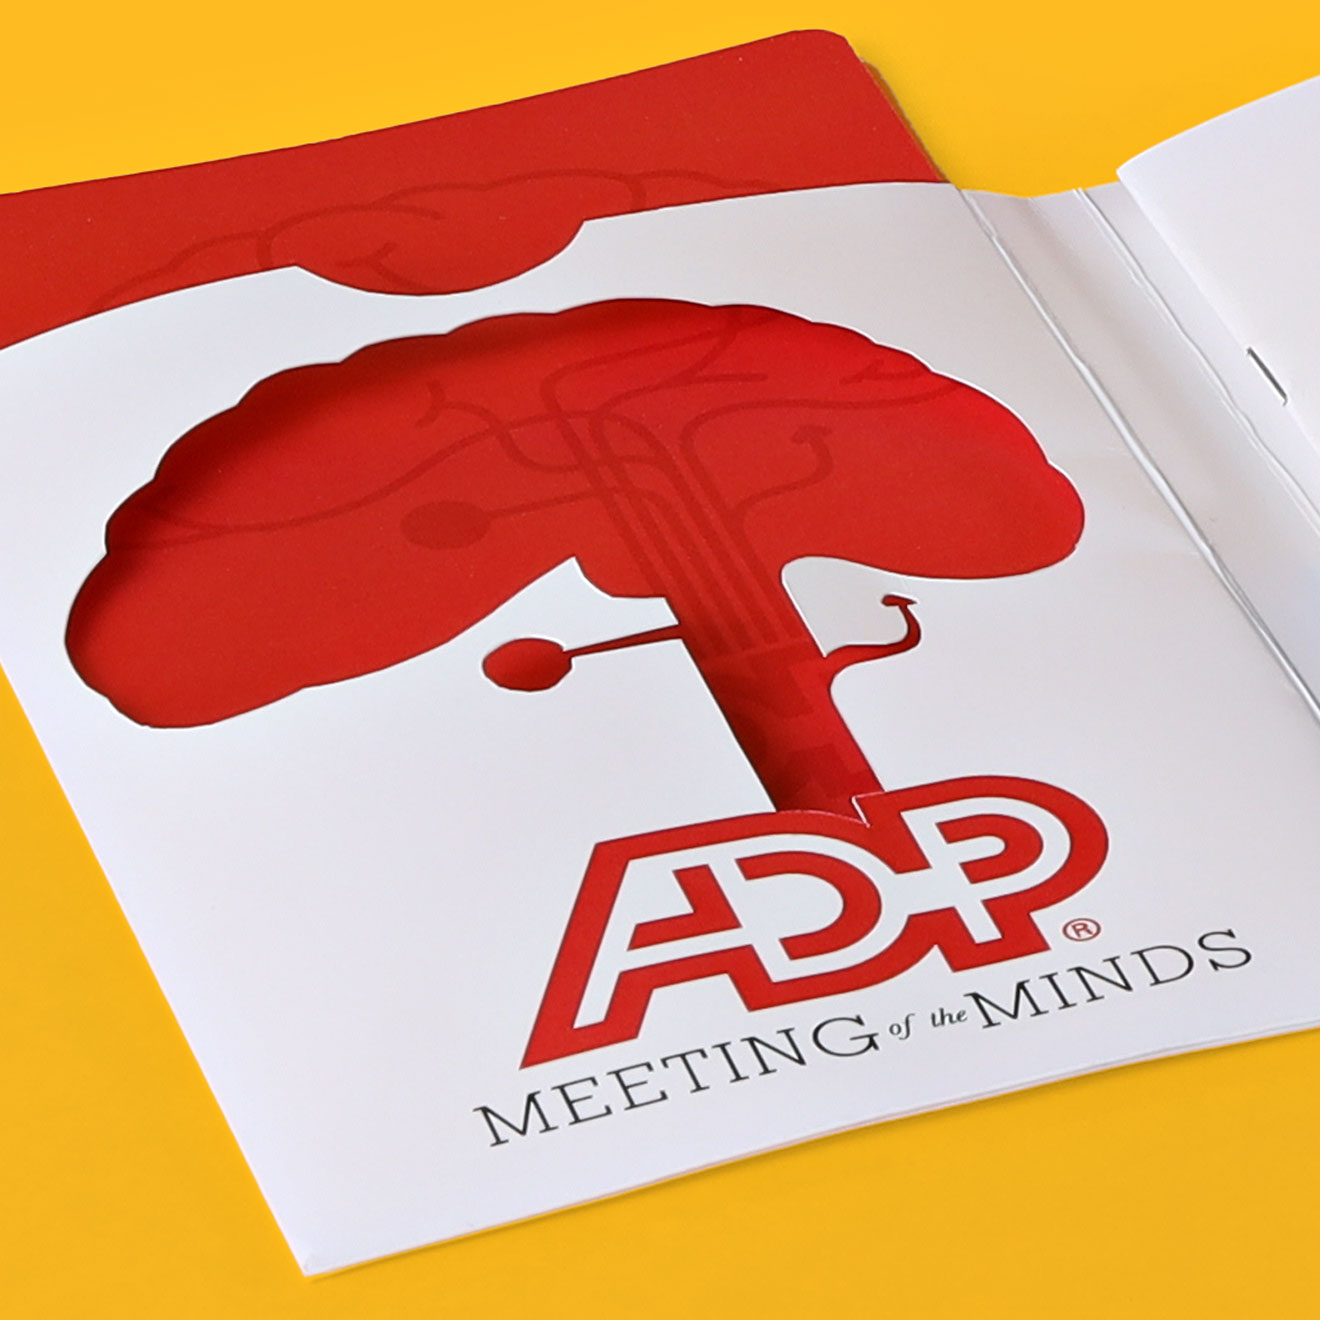 ADP - Meeting Of Minds Mailer